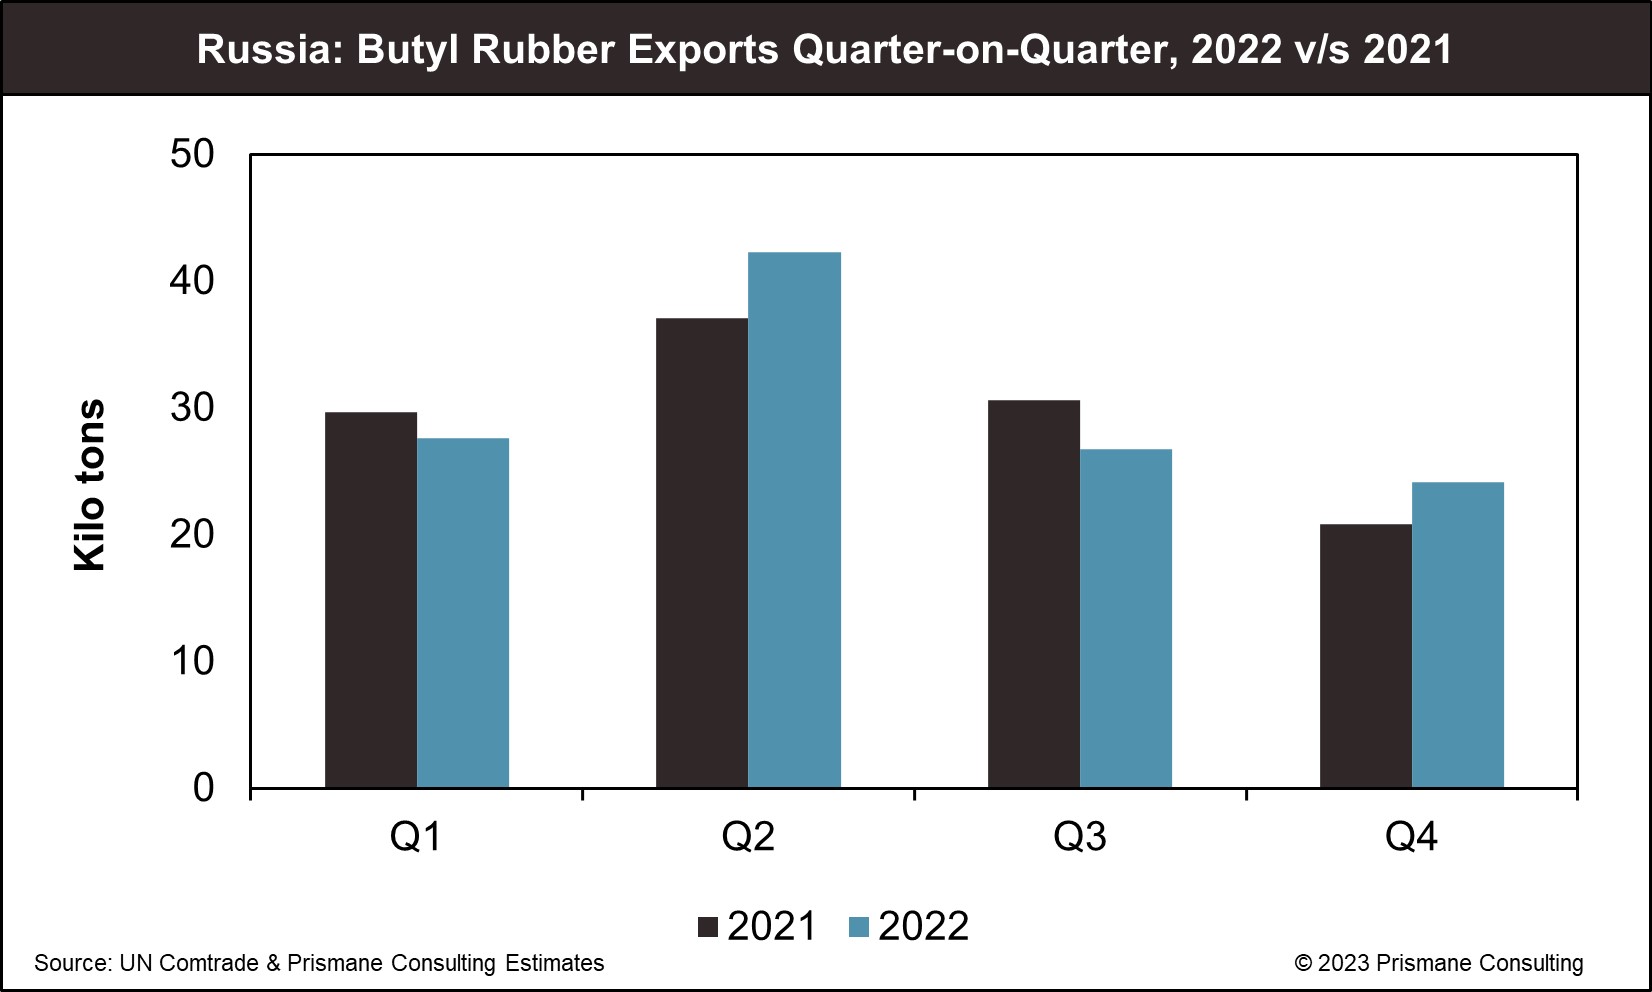 Butyl Rubber Russia exports